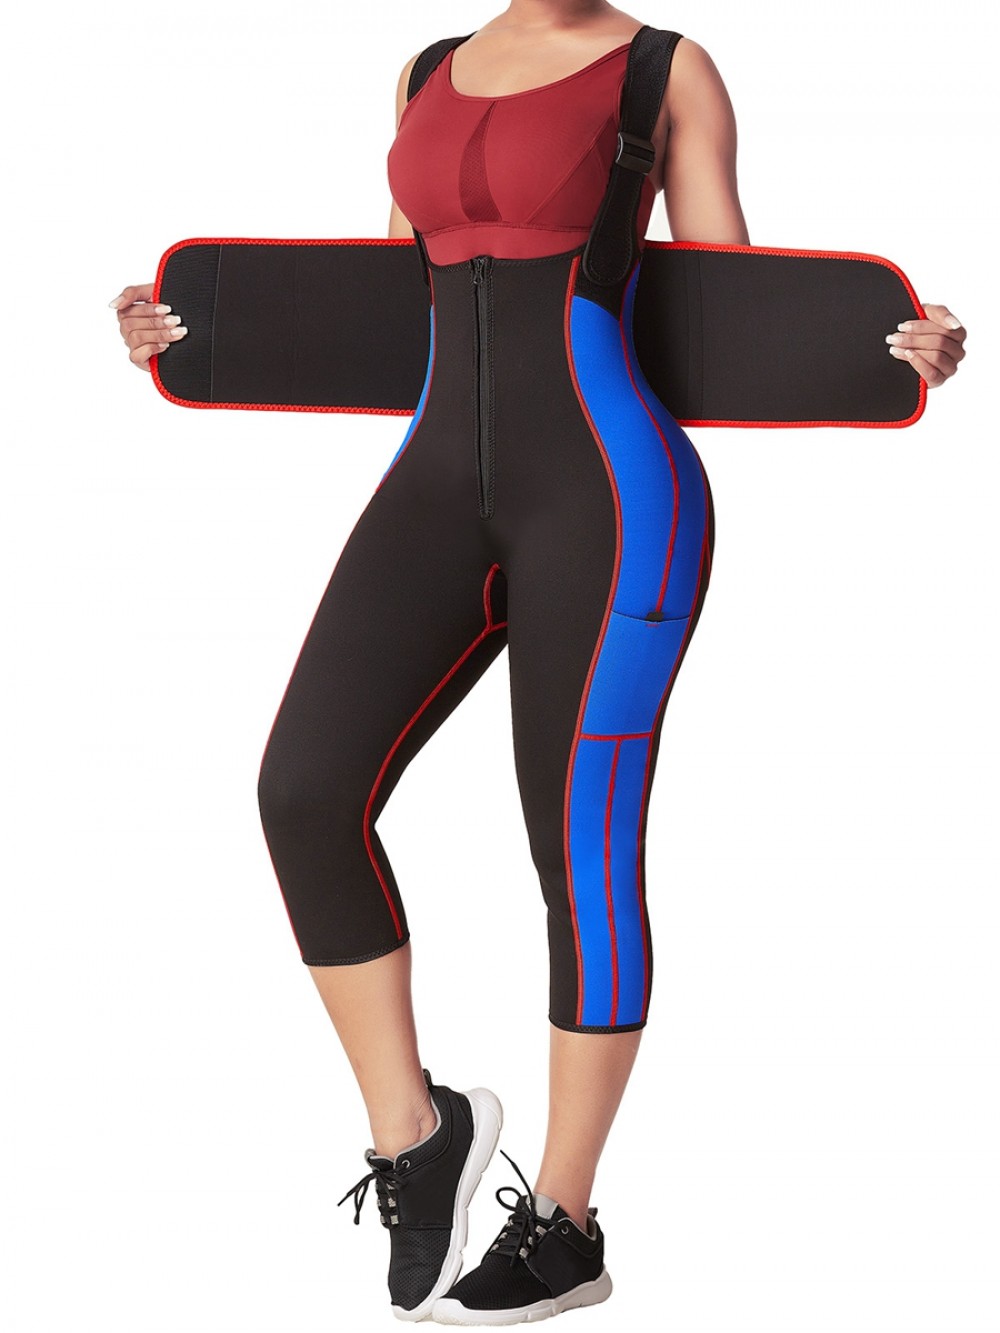 Blue Contrast Color Pockets Sticker Full Body Waist Trainer Weight Loss